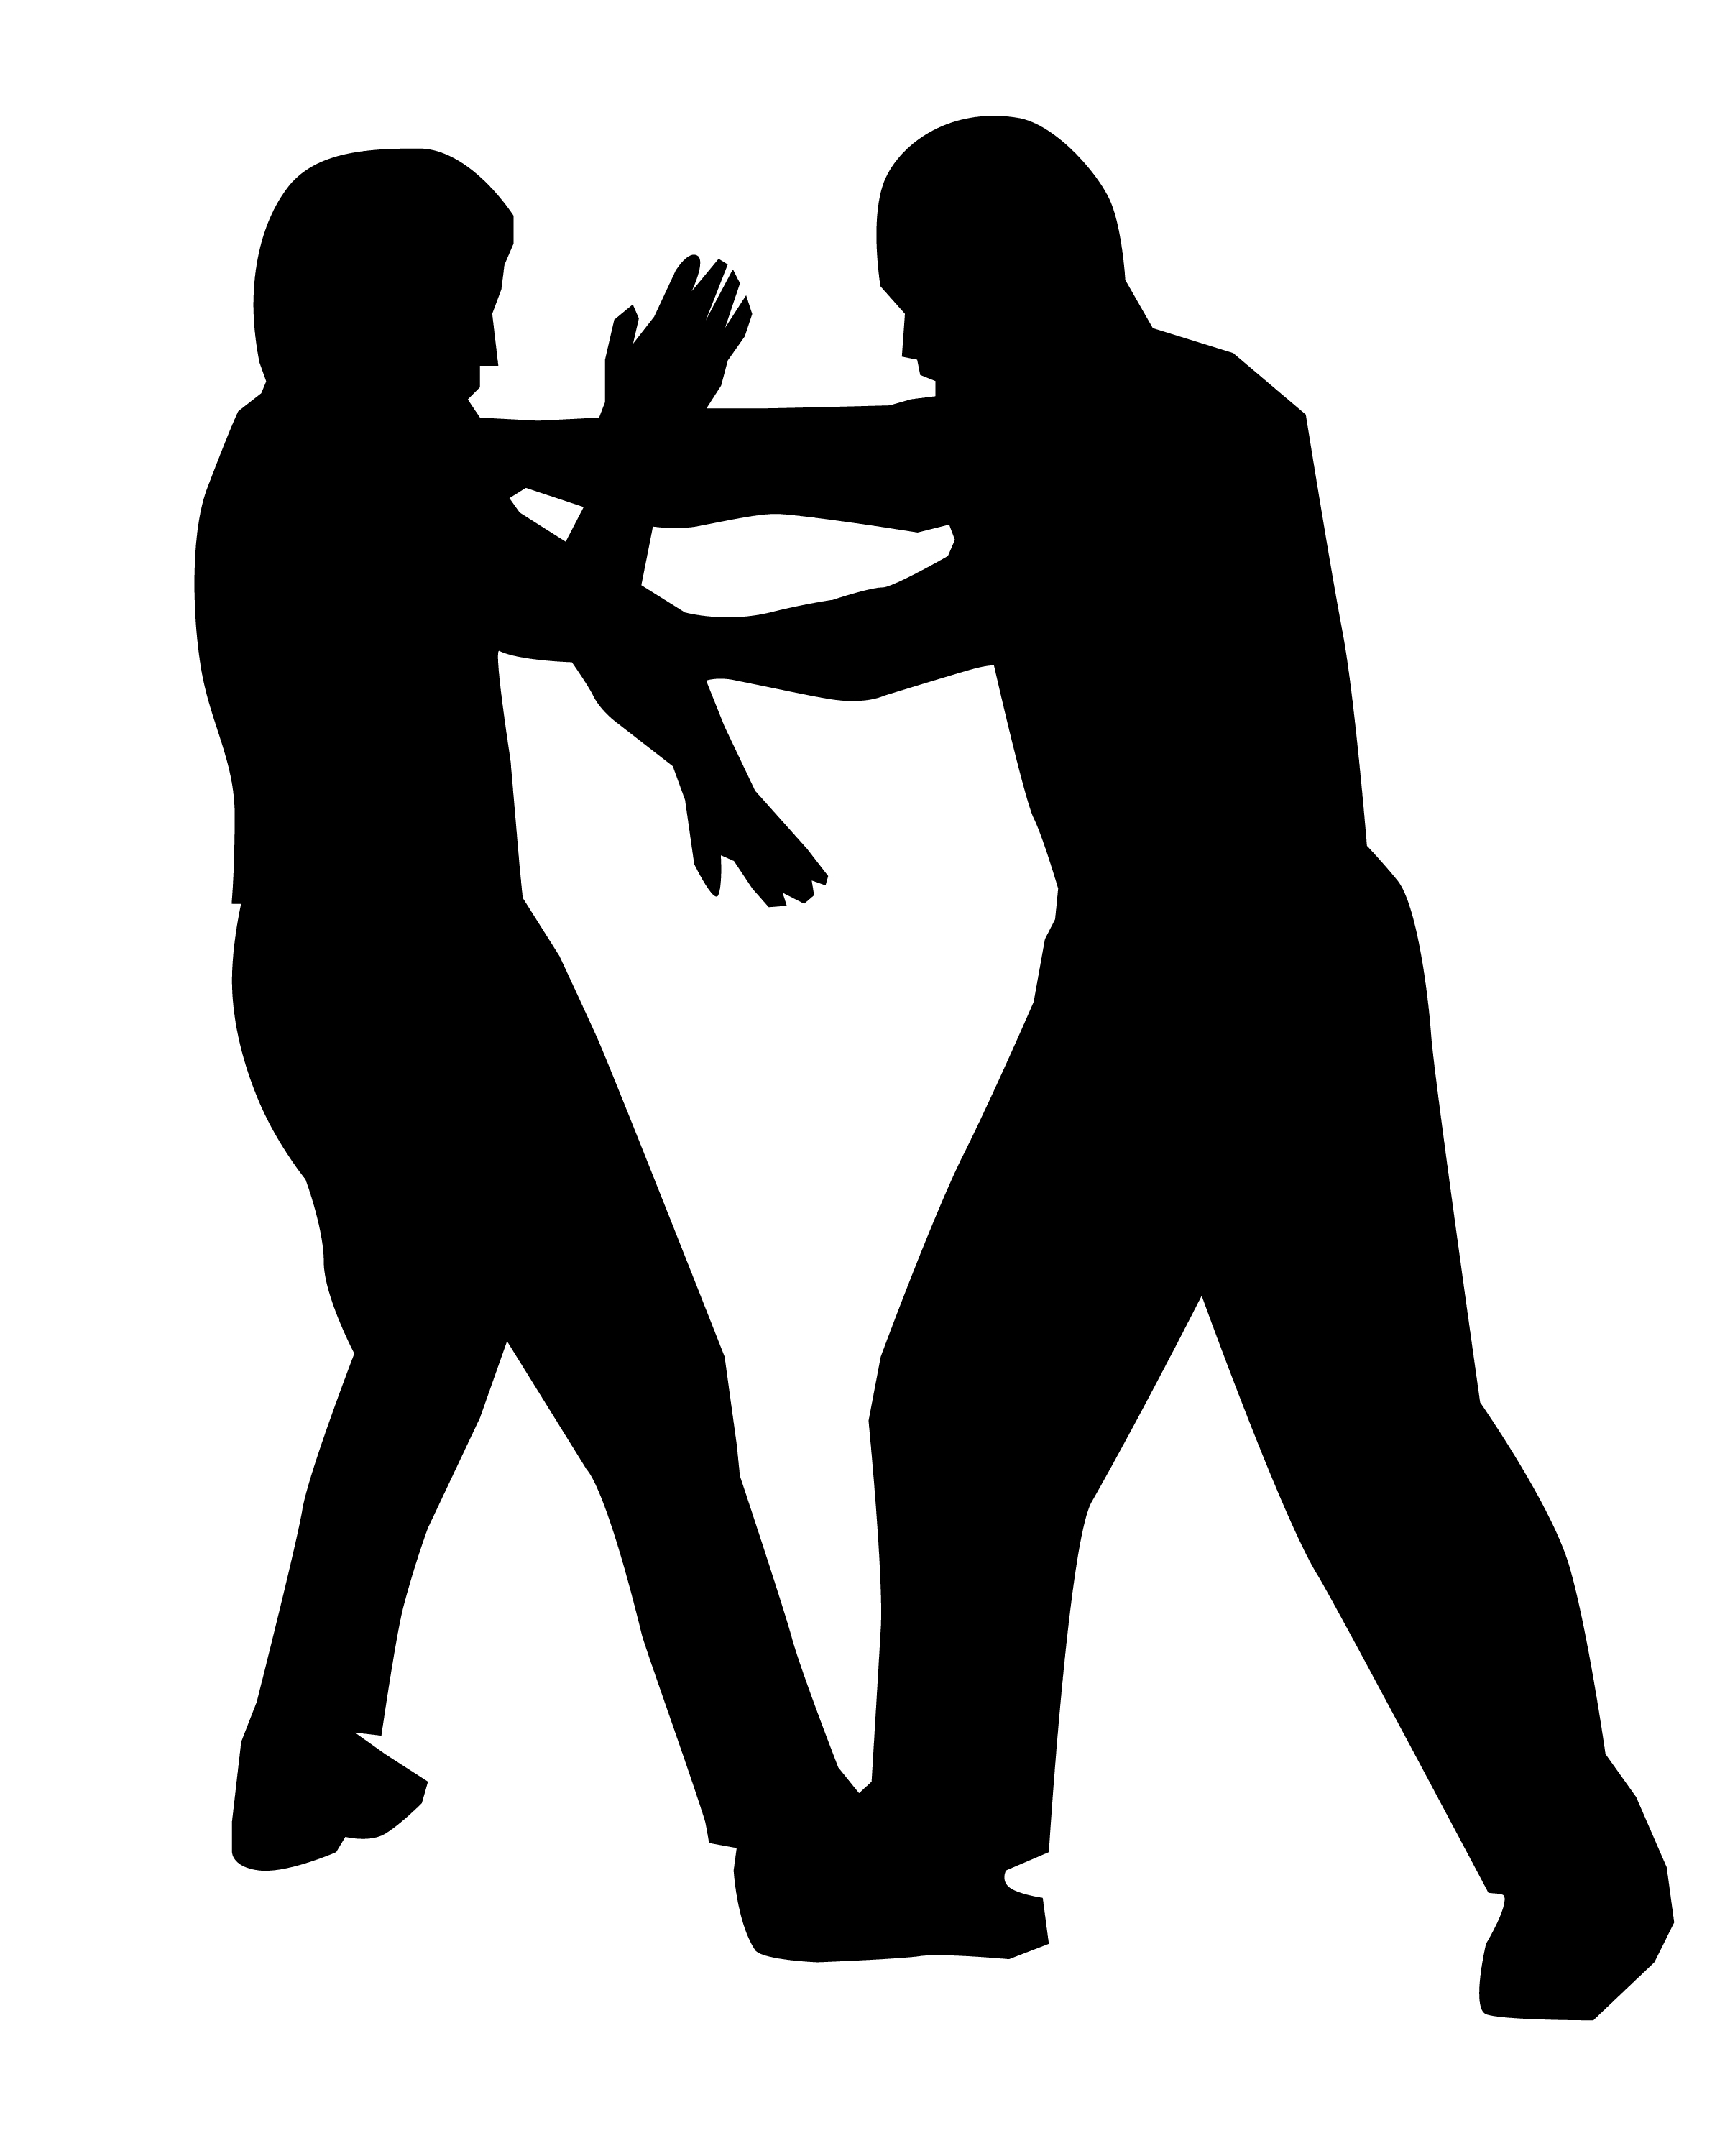 Self defence clipart.